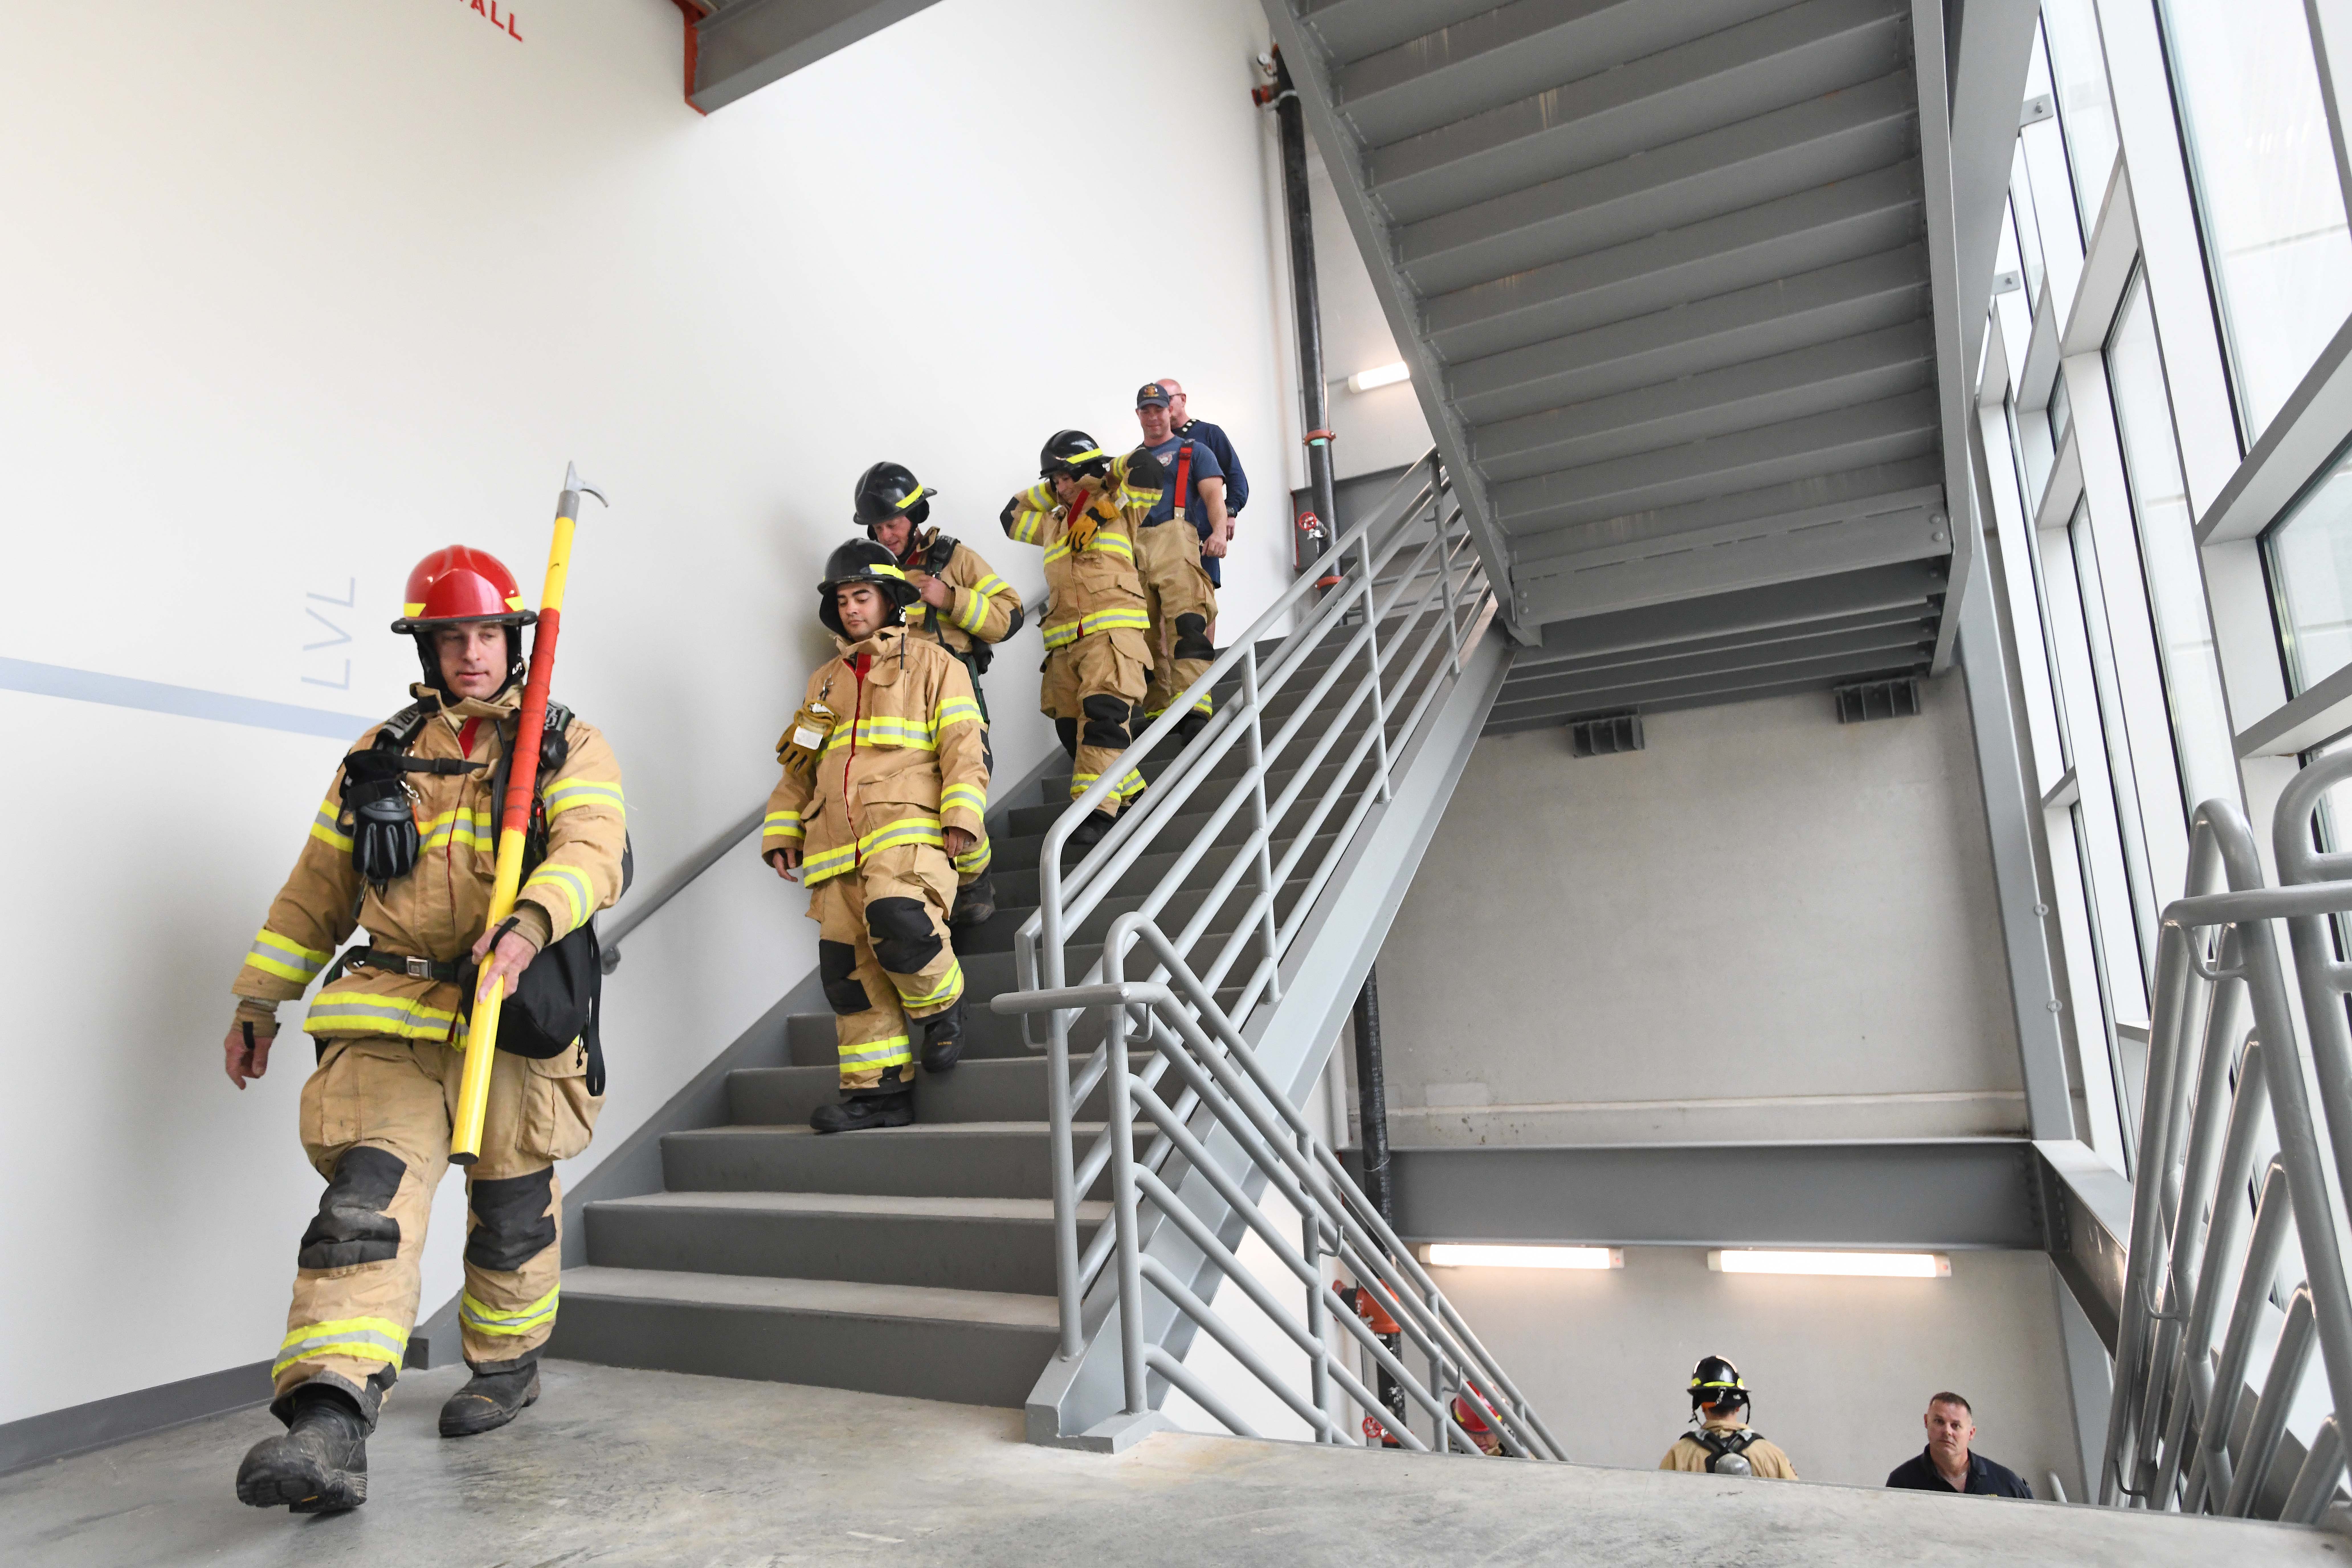 Stair climb honoring 9/11 firefighters